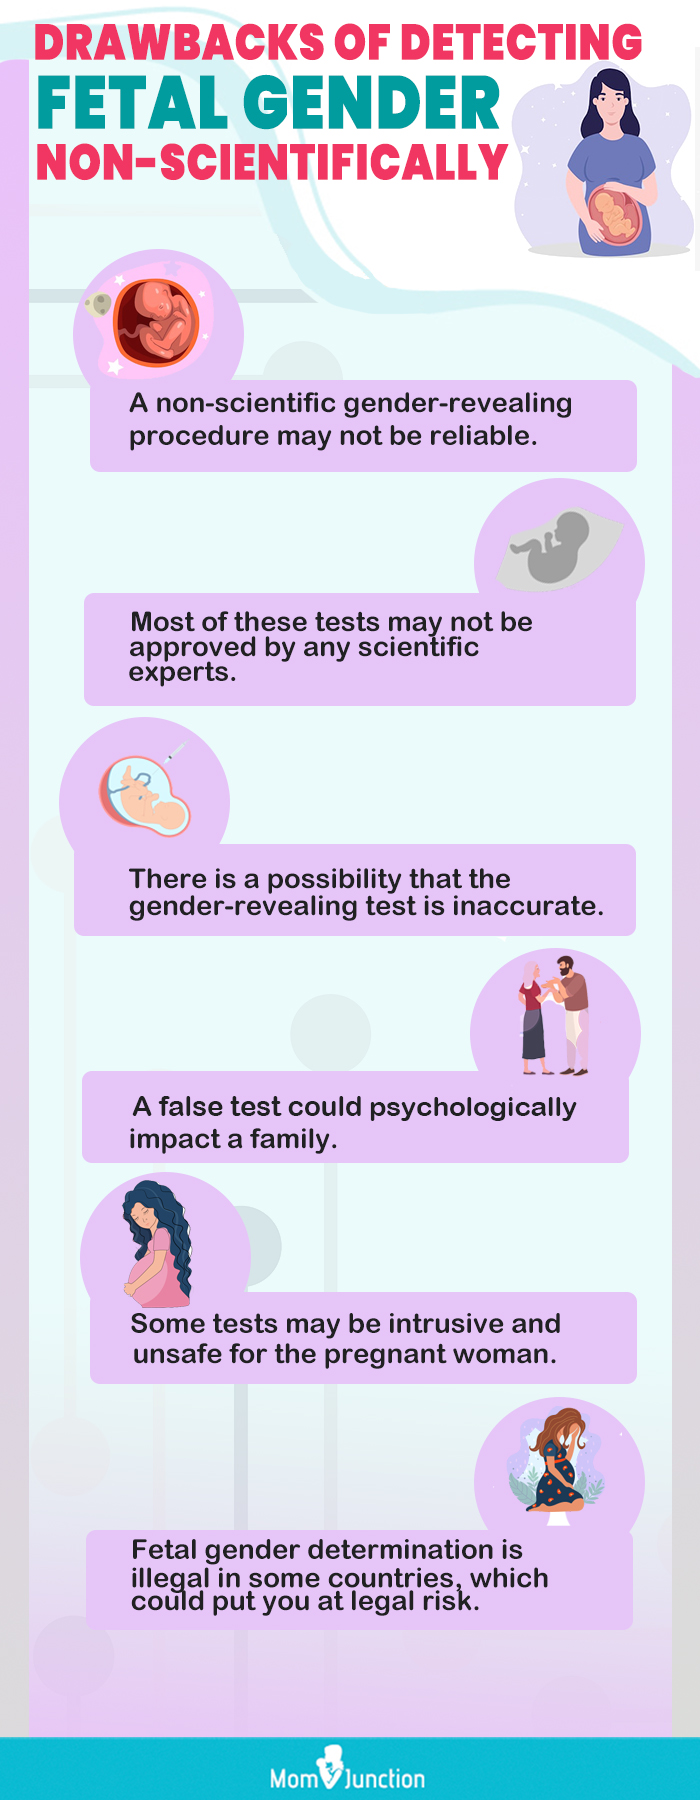 drawbacks of detecting fetal gender non scientifically (infographic)